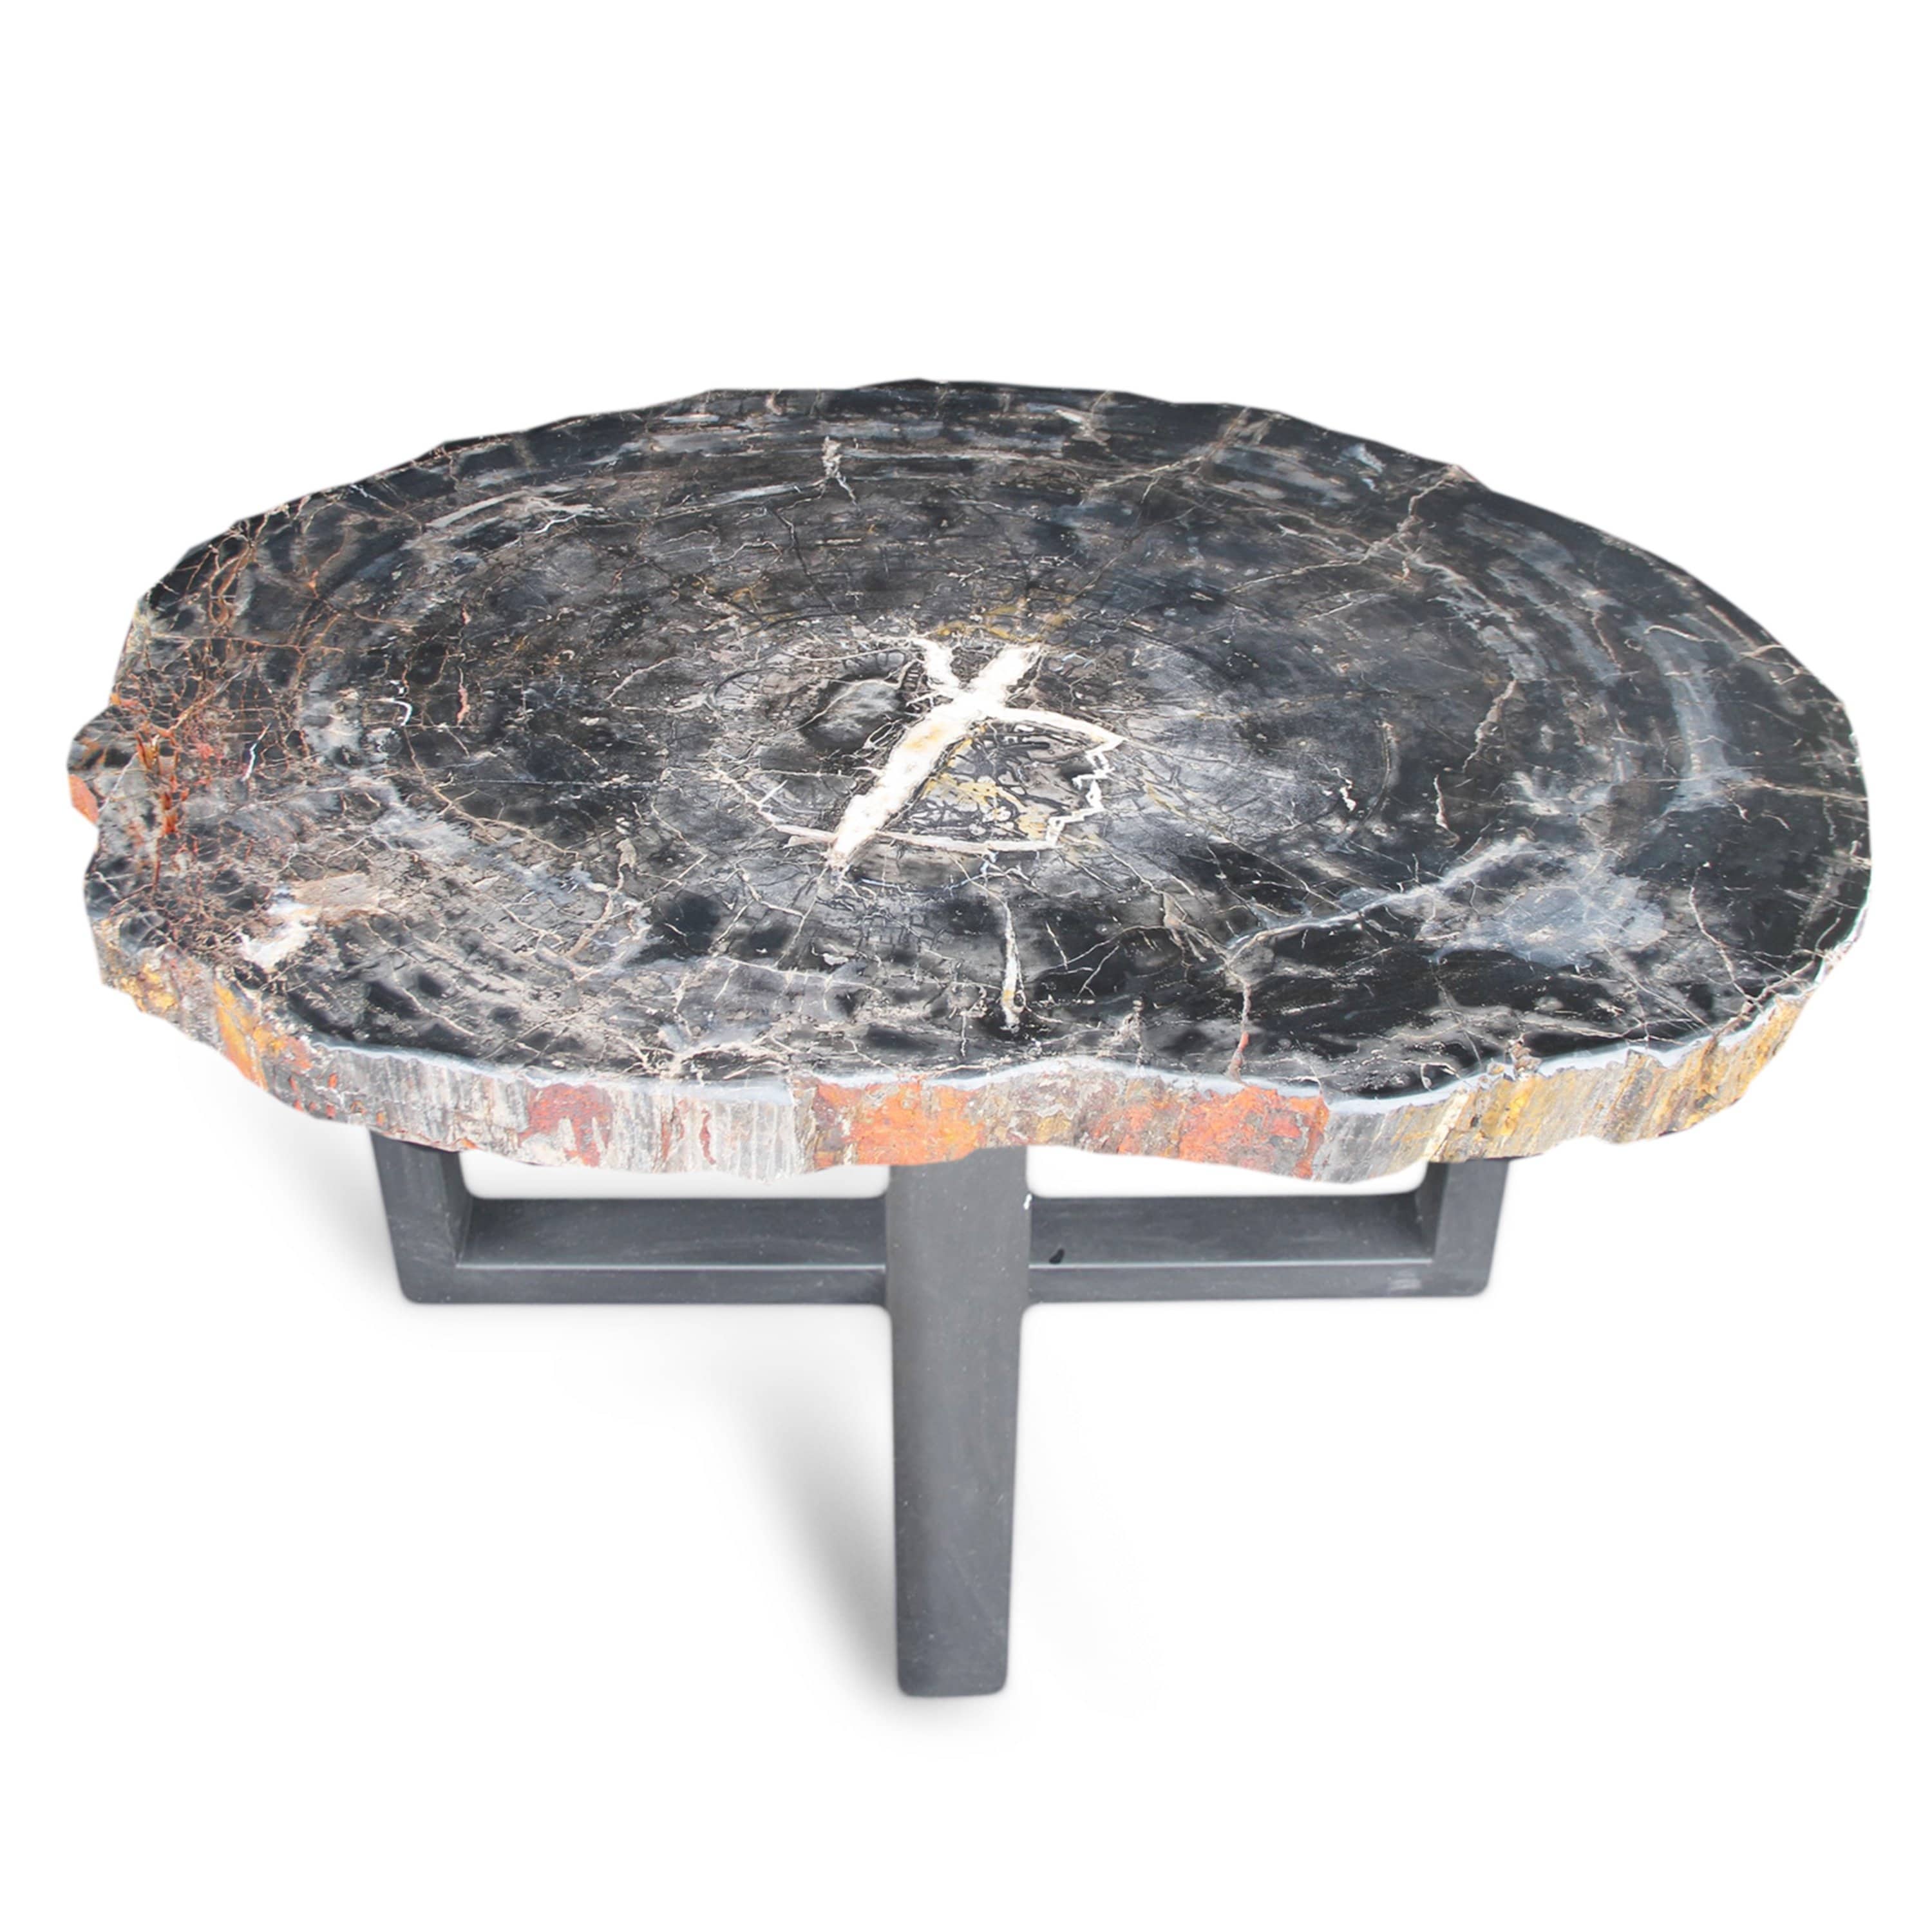 Kalifano Petrified Wood Natural Polished Petrified Wood Round Table Top from Indonesia - 45" / 276 lbs PWT7500.002